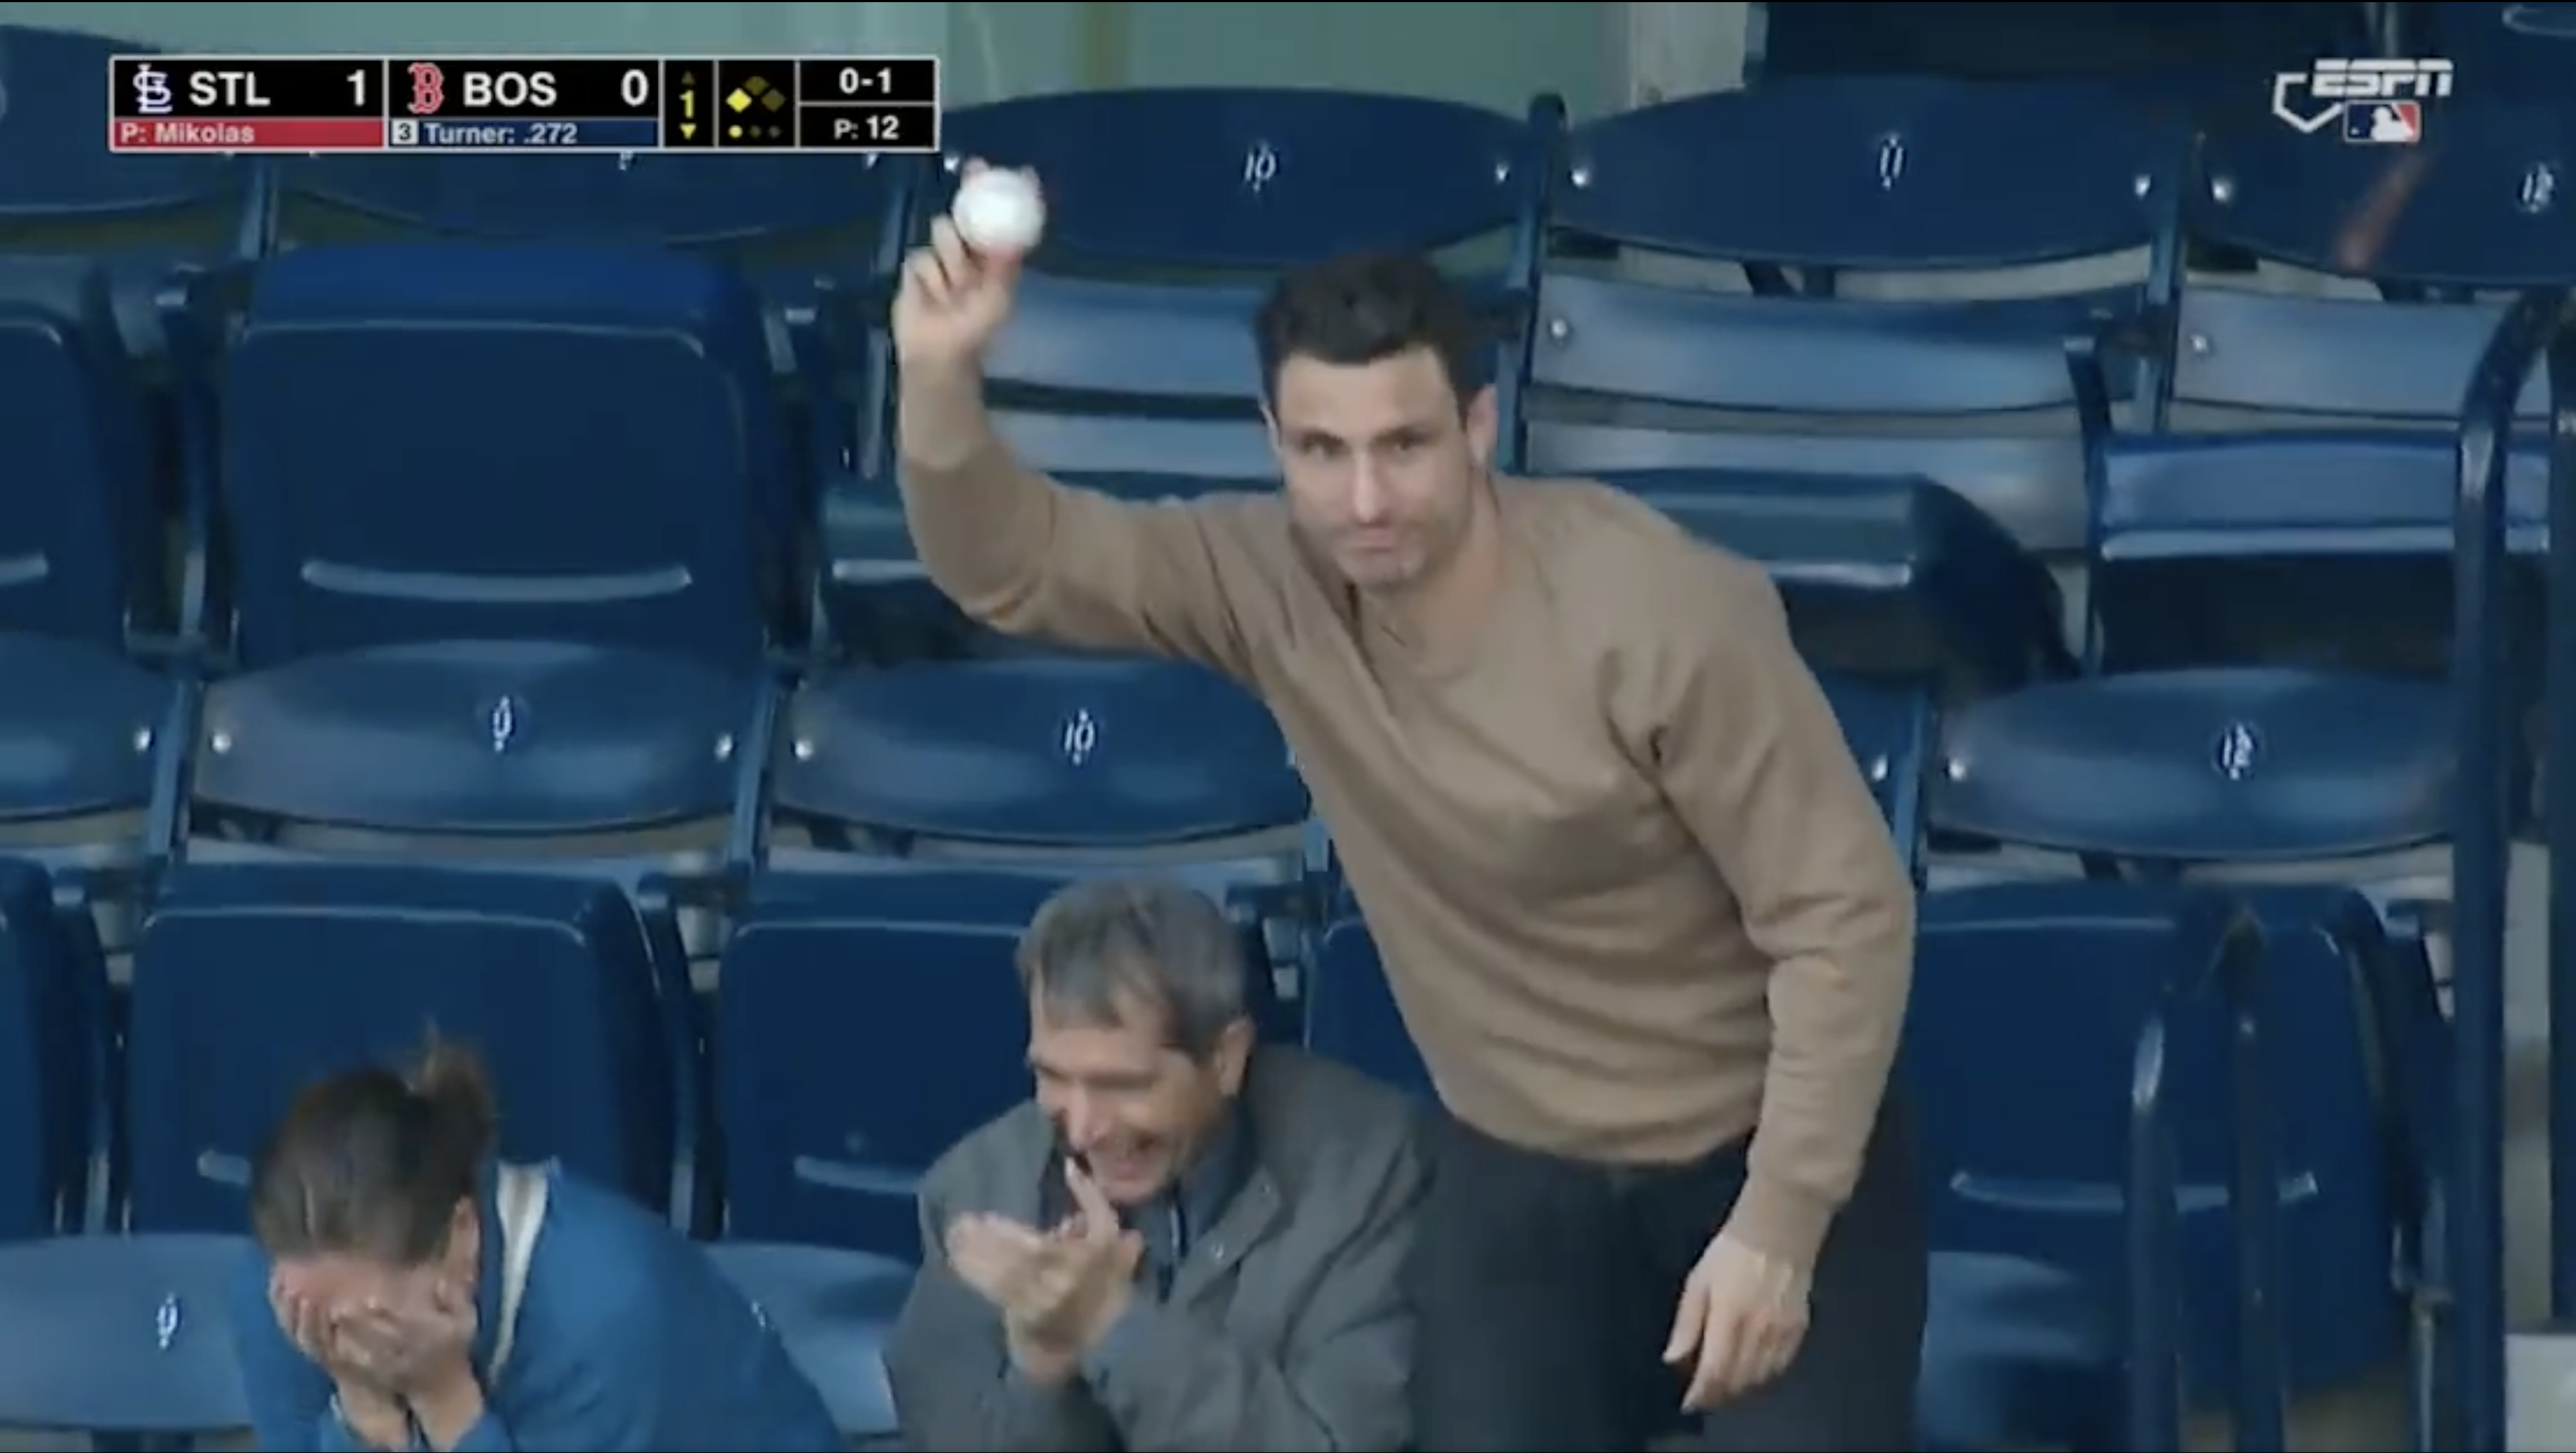 Garnet Hathaway shows off a foul ball he caught at a Boston Red Sox game.